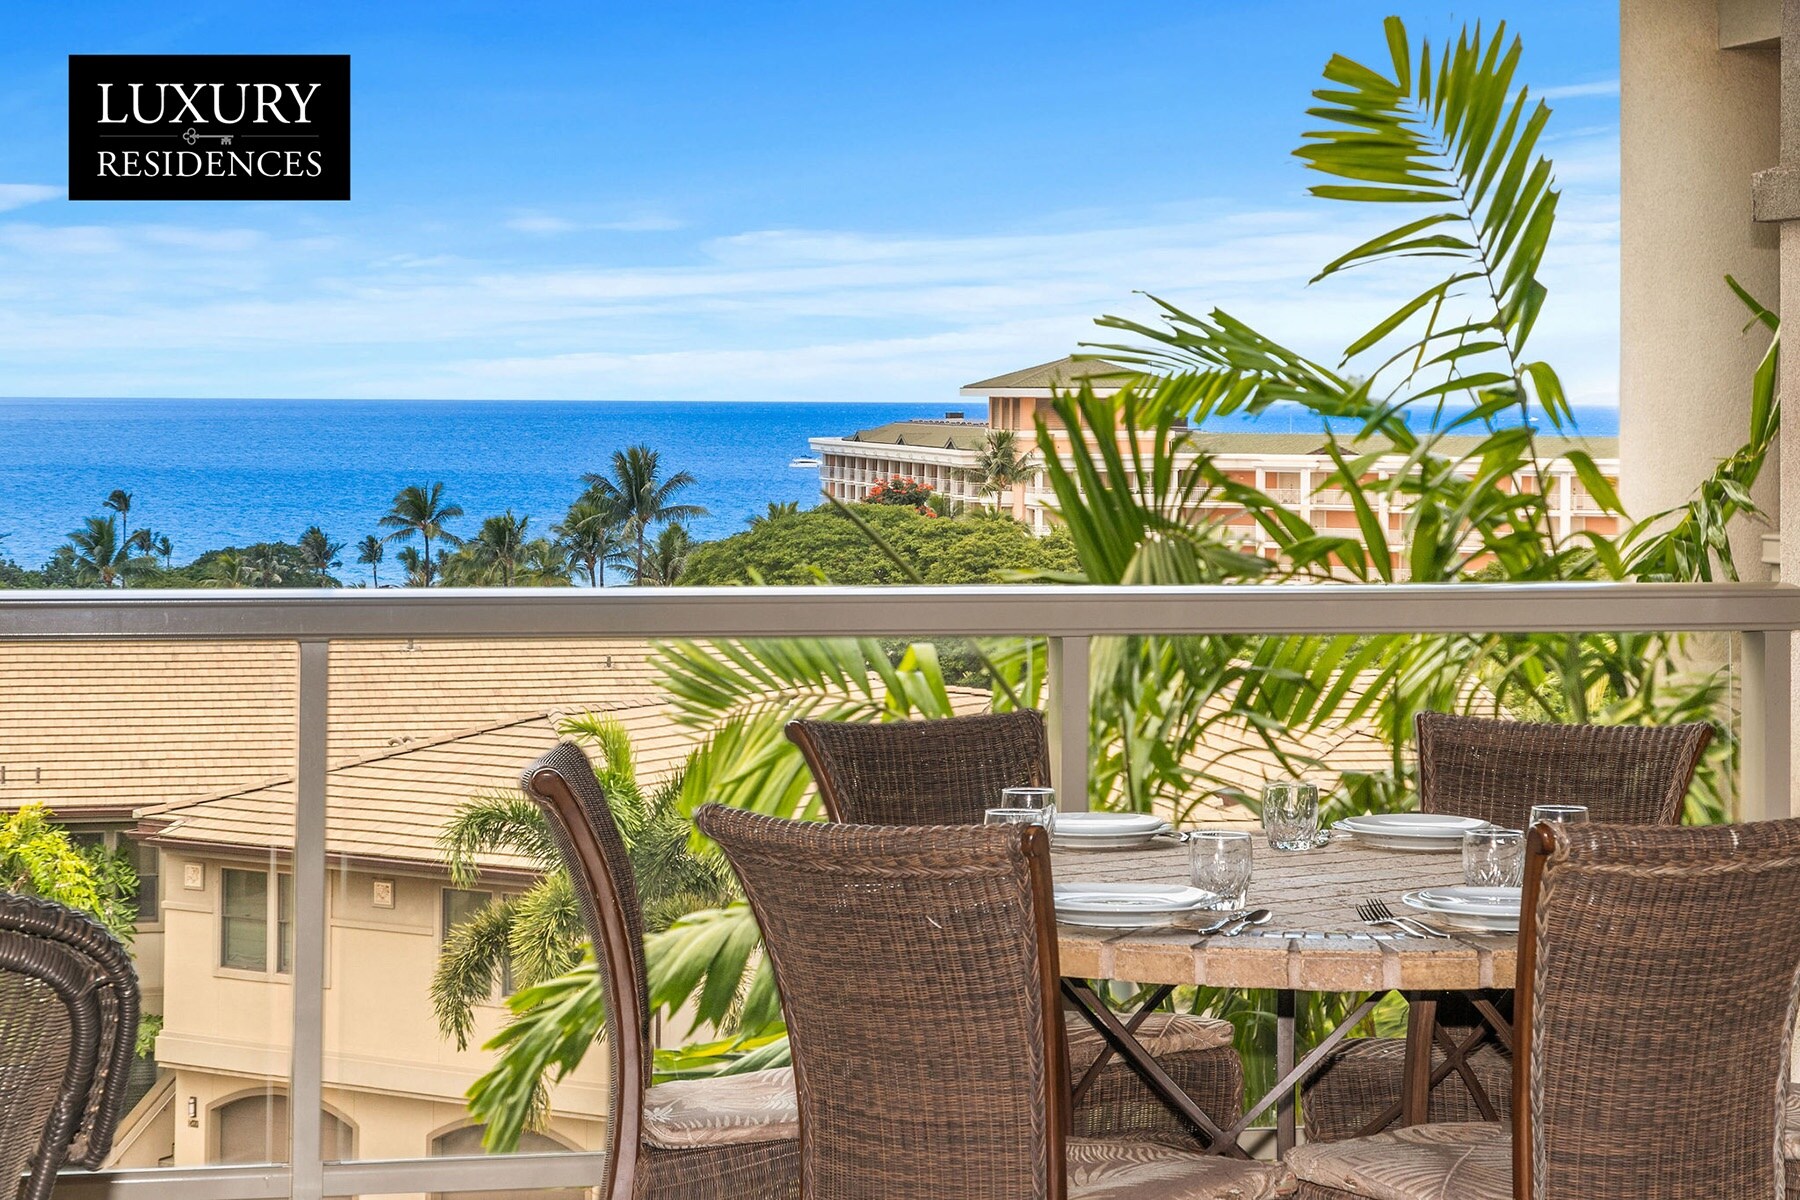 Dine and enjoy the sights on the lanai